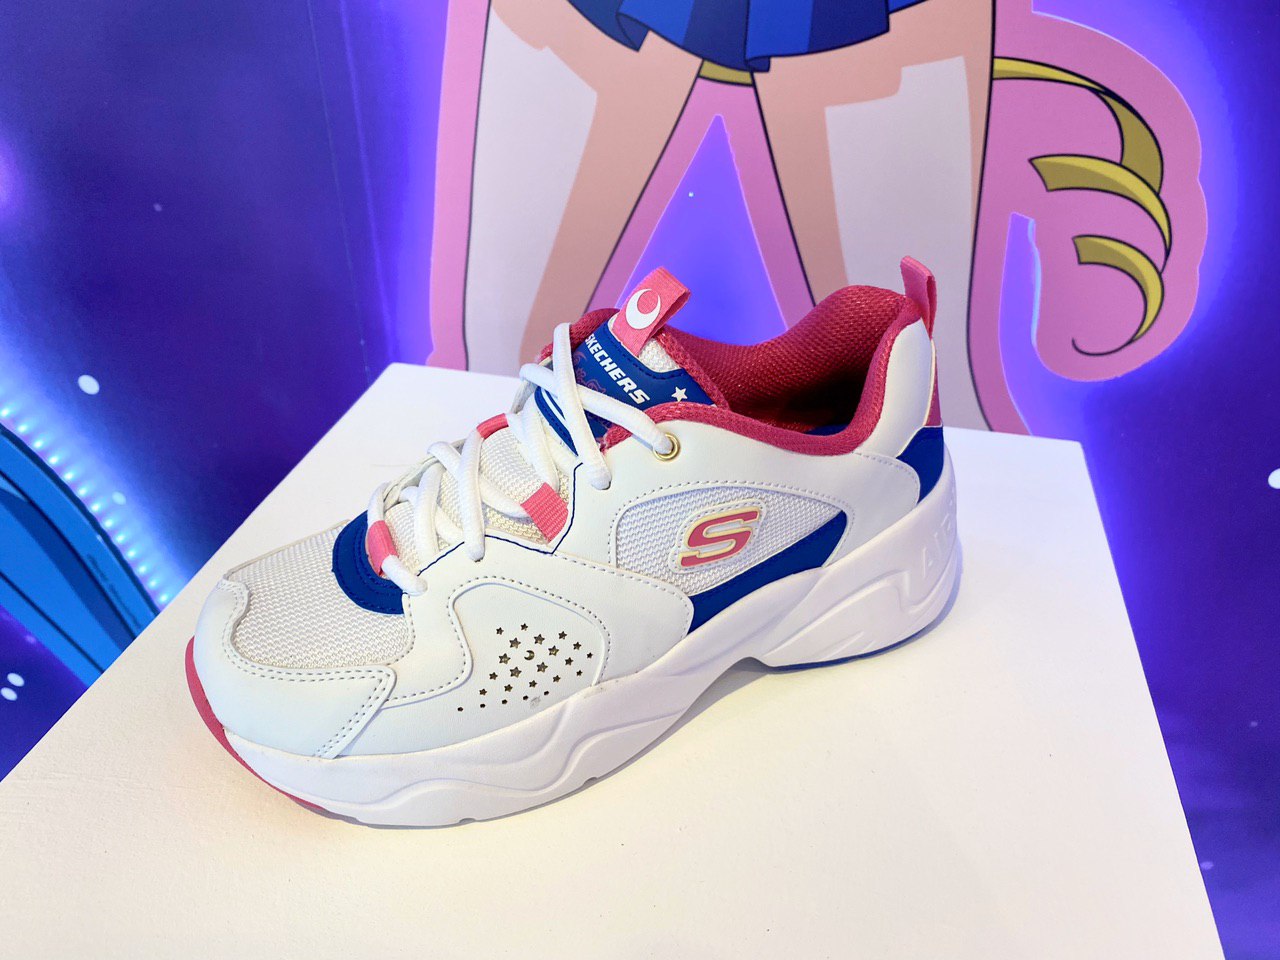 Skechers x Sailormoon sneakers & apparel now available in S'pore S$39 - - Mothership.SG - News from Singapore, Asia and around the